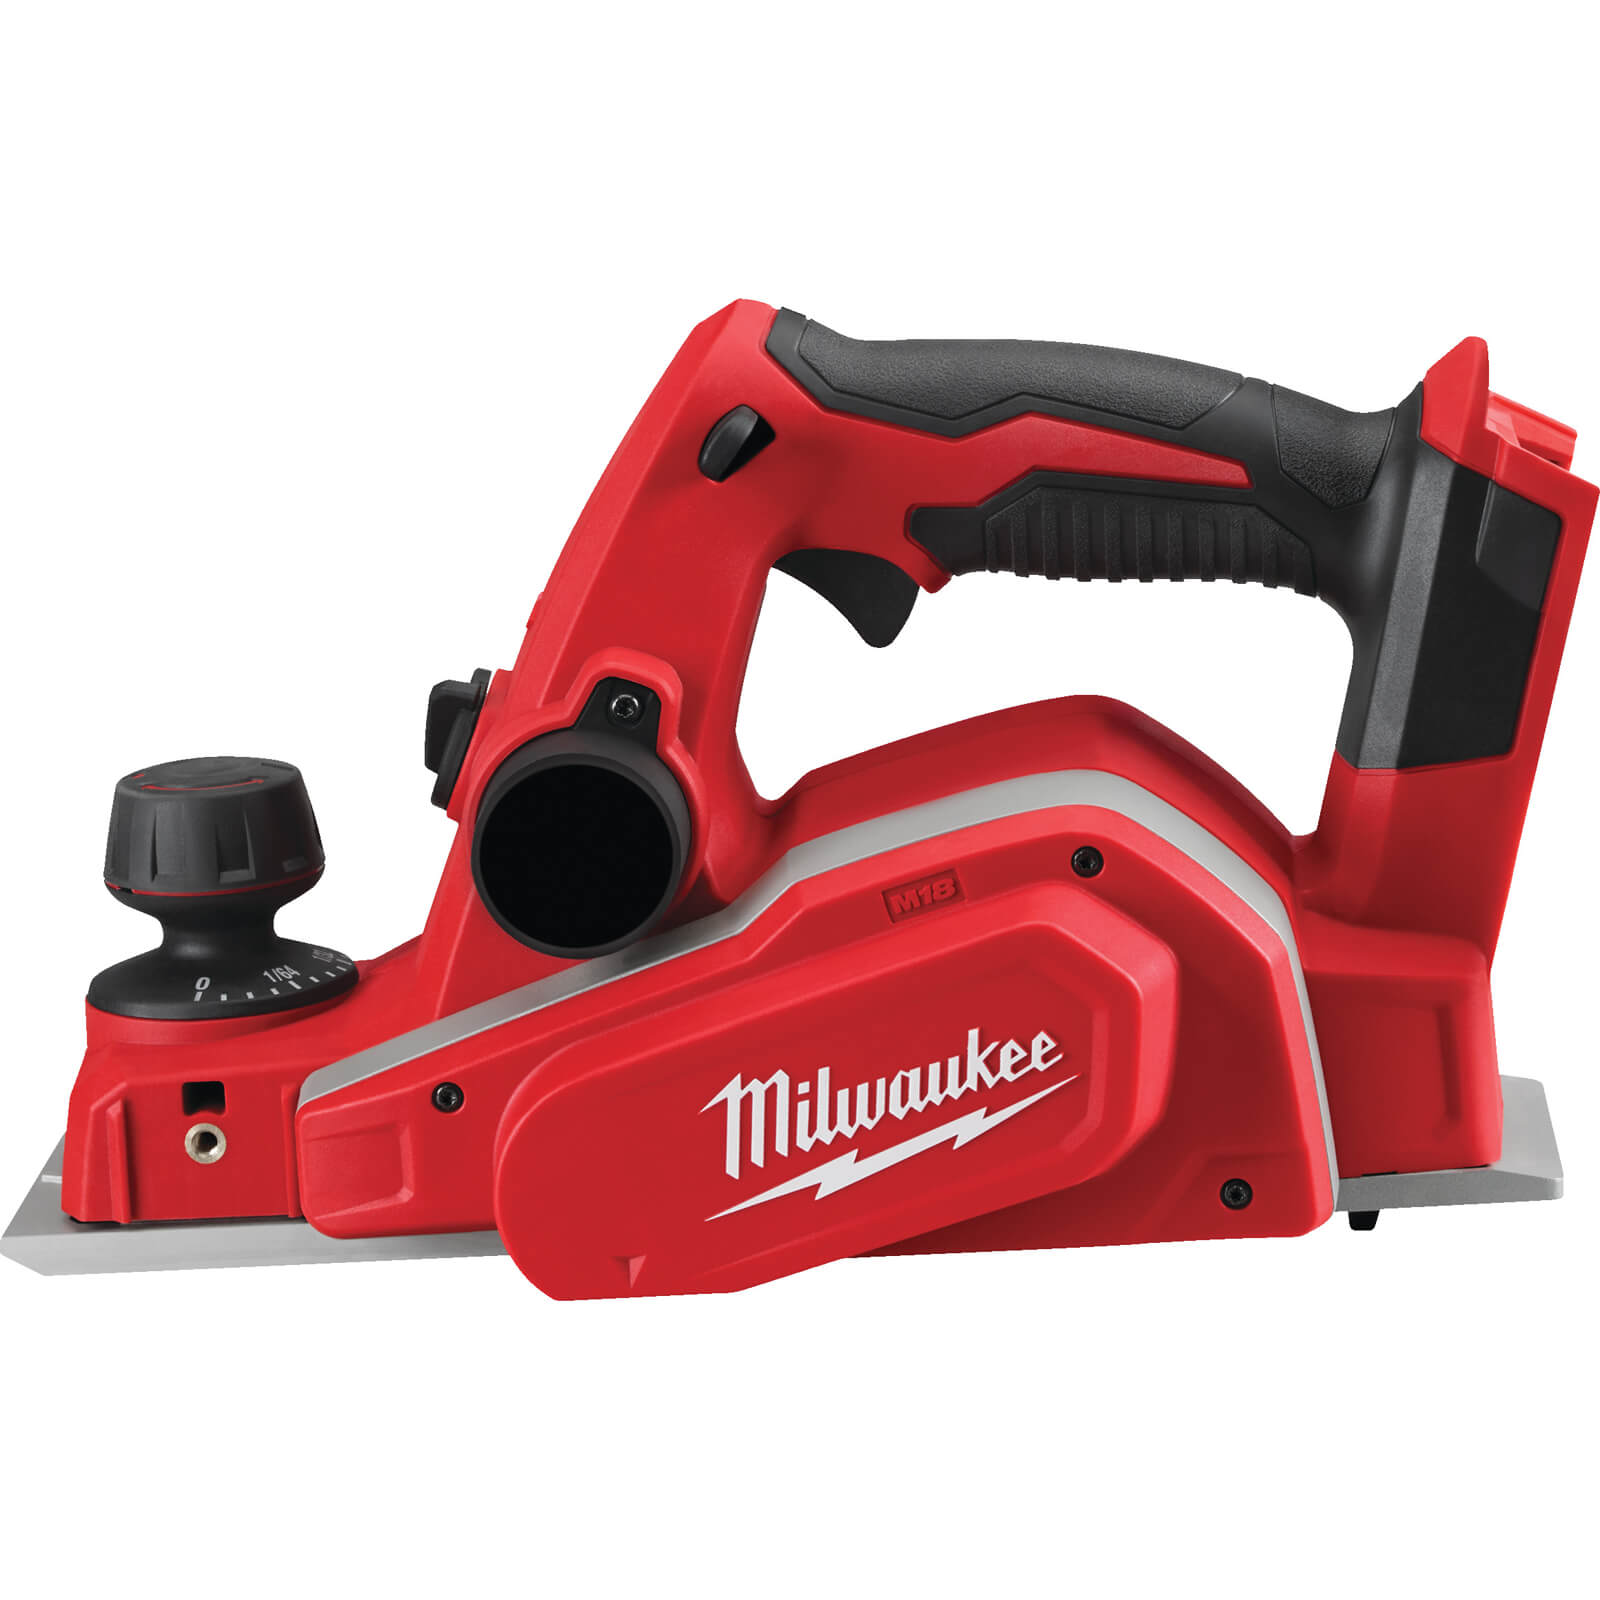 Image of Milwaukee M18 BP 18v Cordless Planer No Batteries No Charger No Case